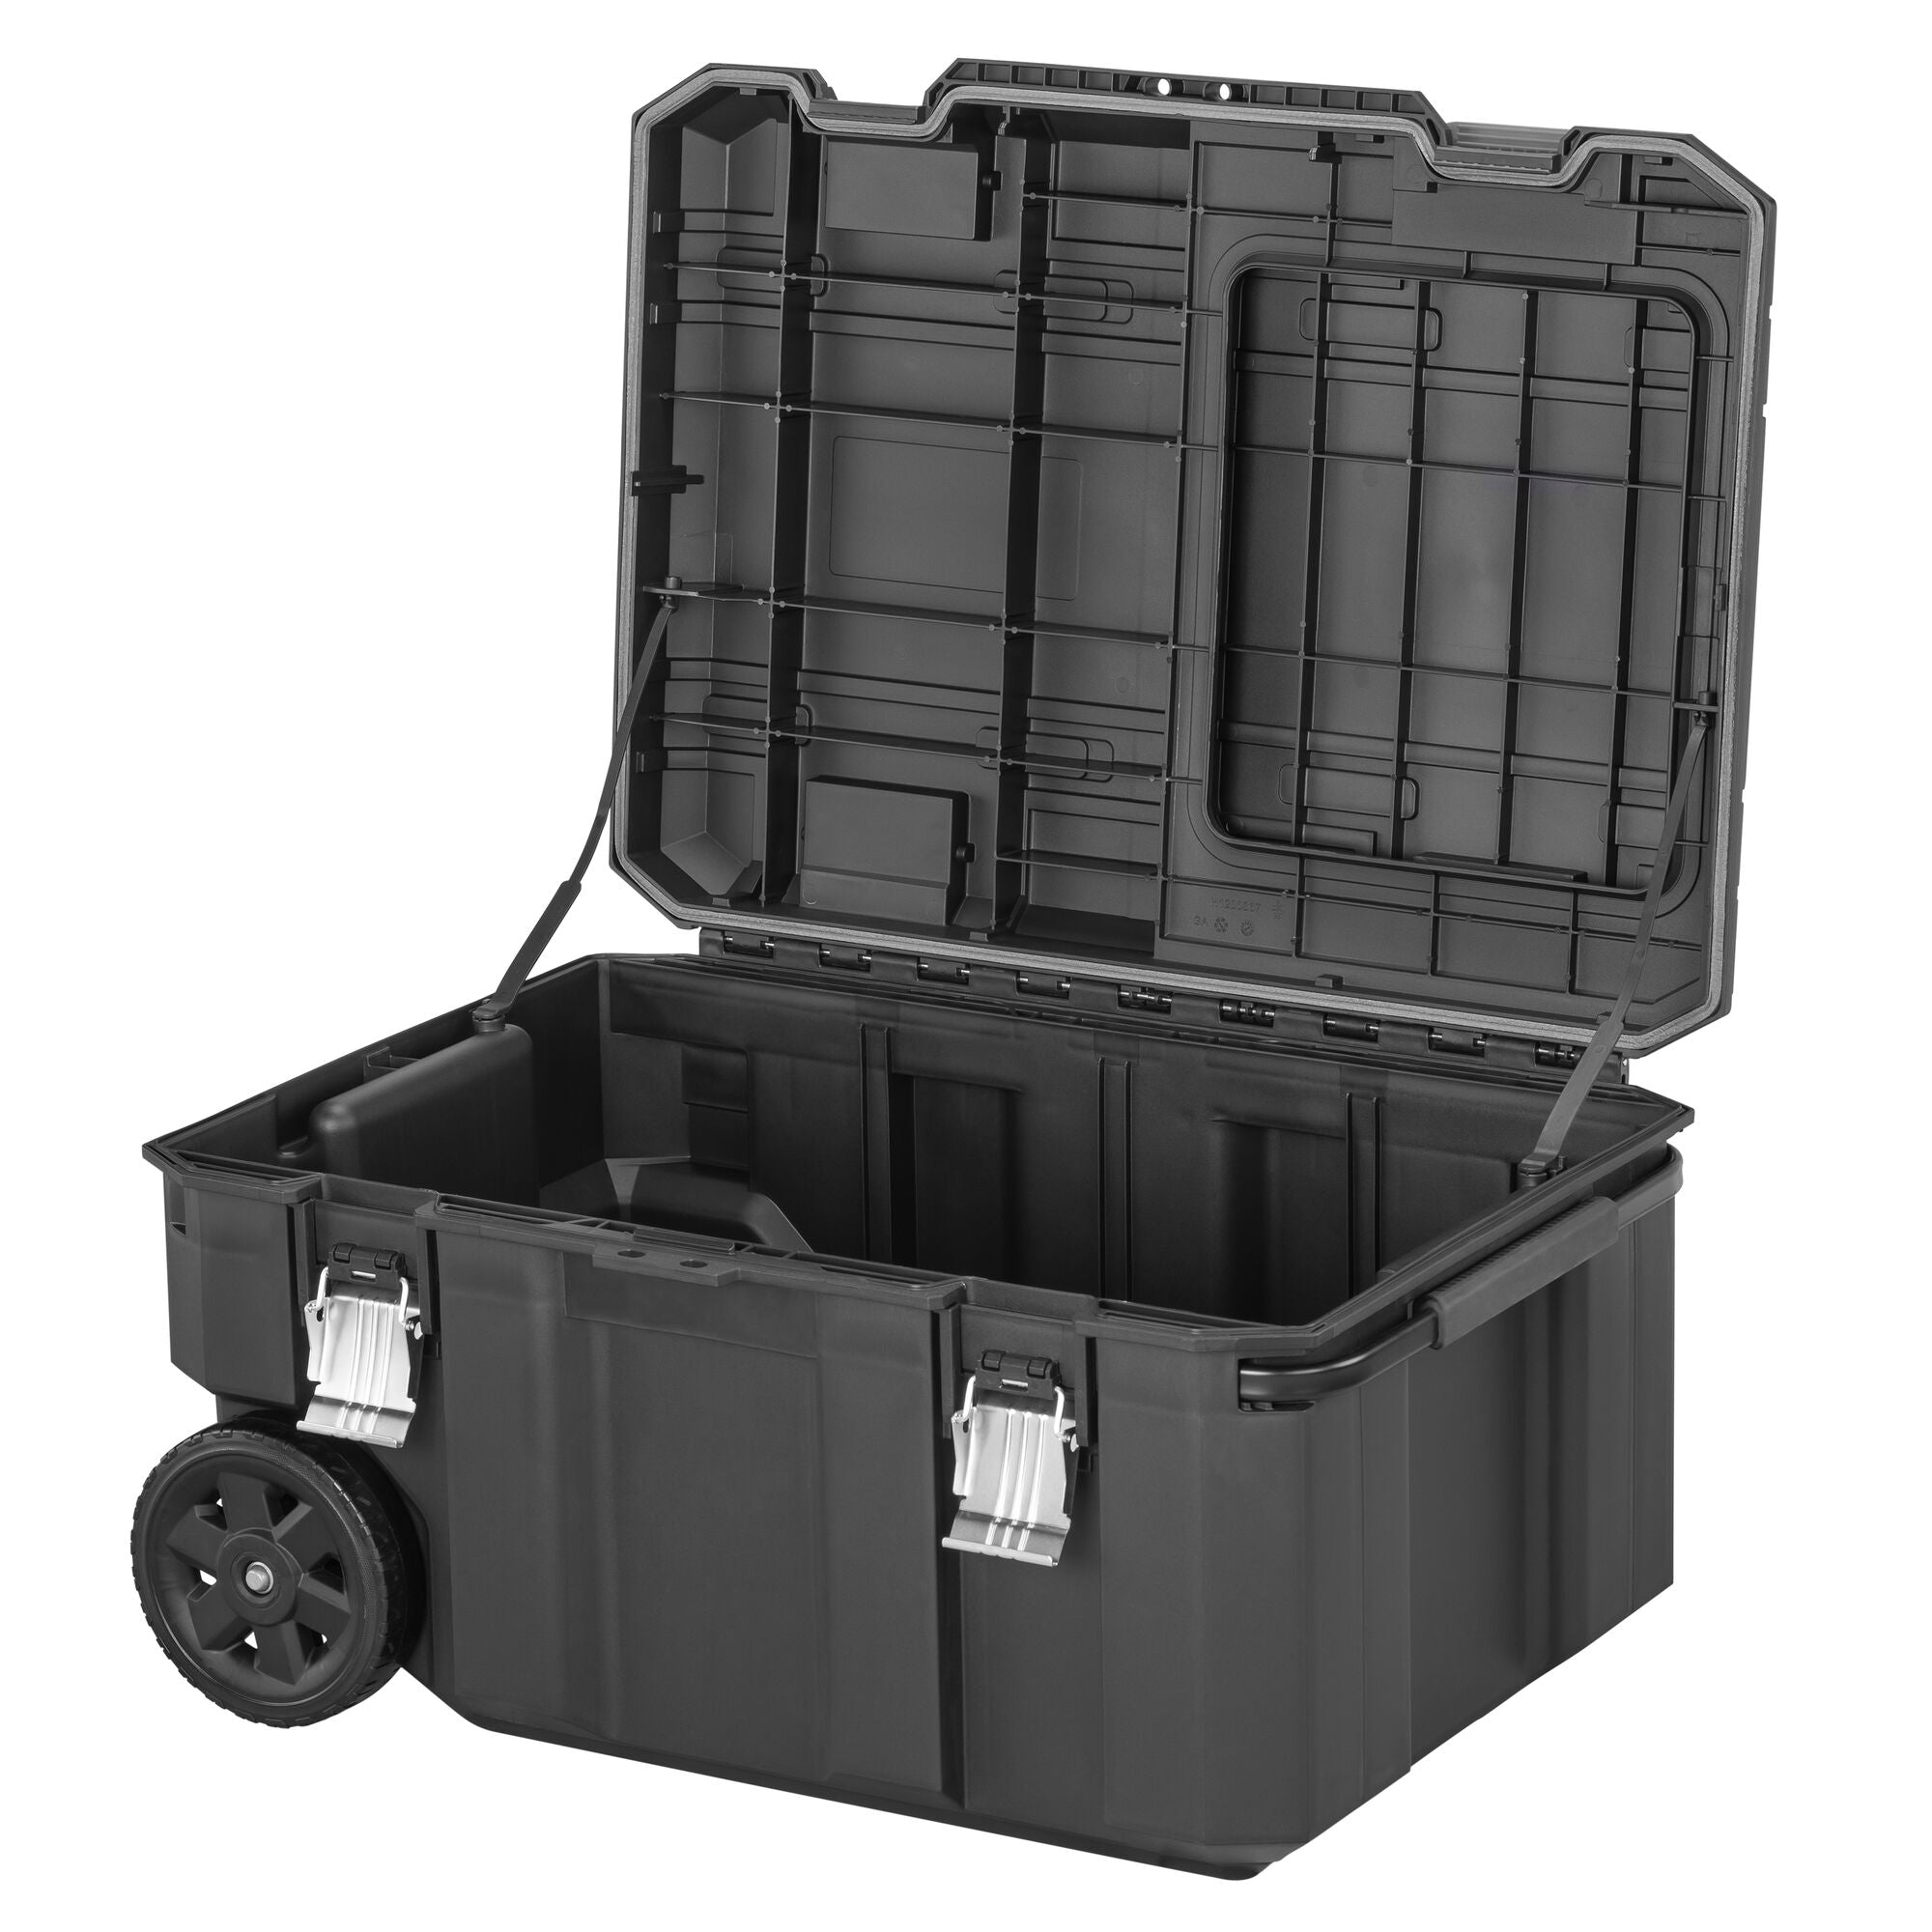 CRAFTSMAN VERSASTACK 30 Gallon Chest with full lid open